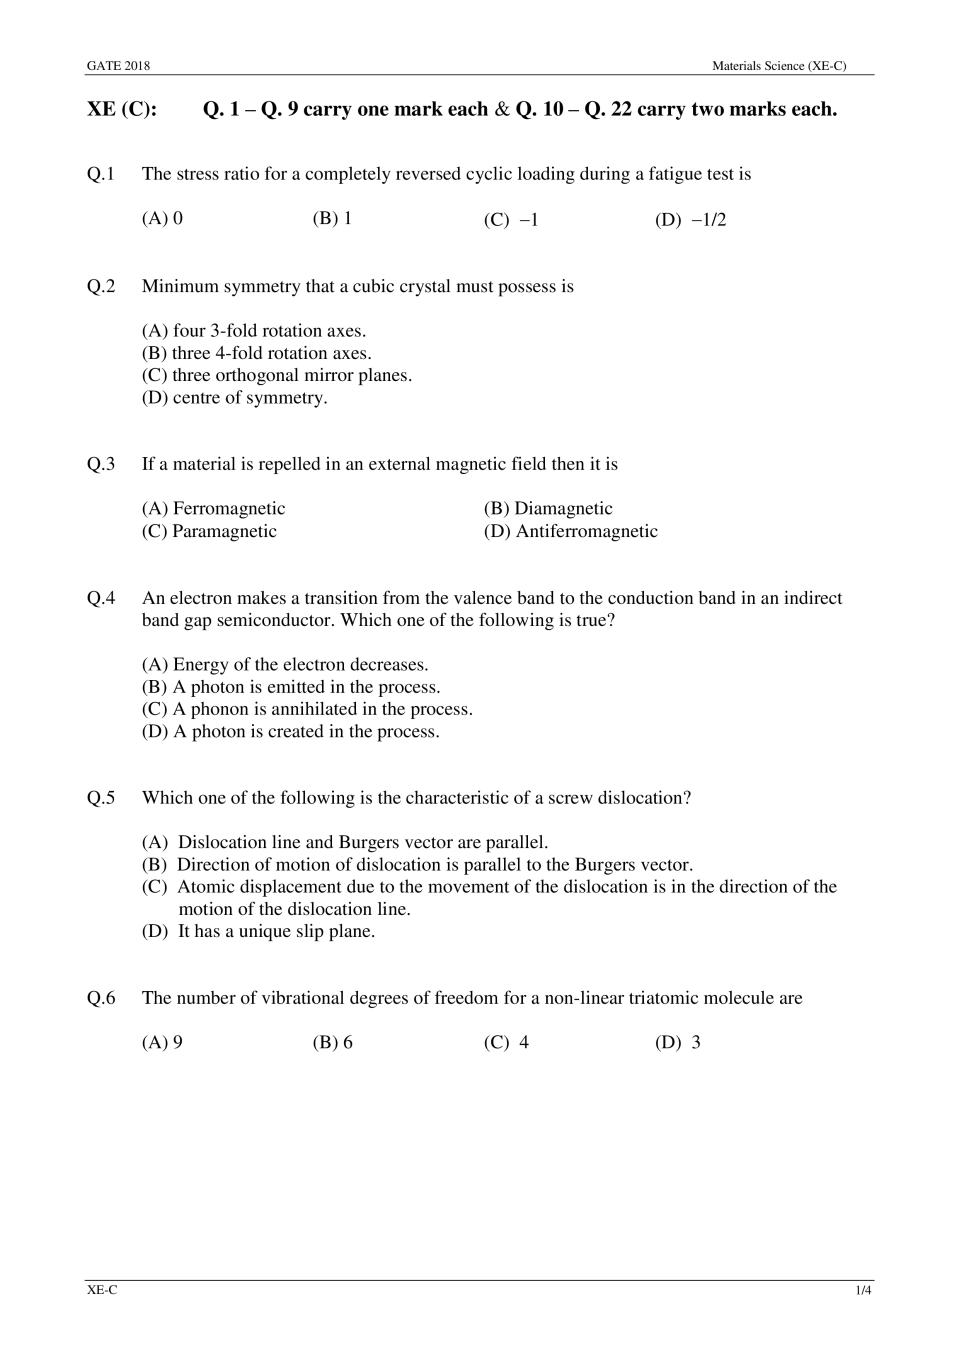 GATE 2018 Materials Science (XE-C) Question Paper with Answer - Page 1